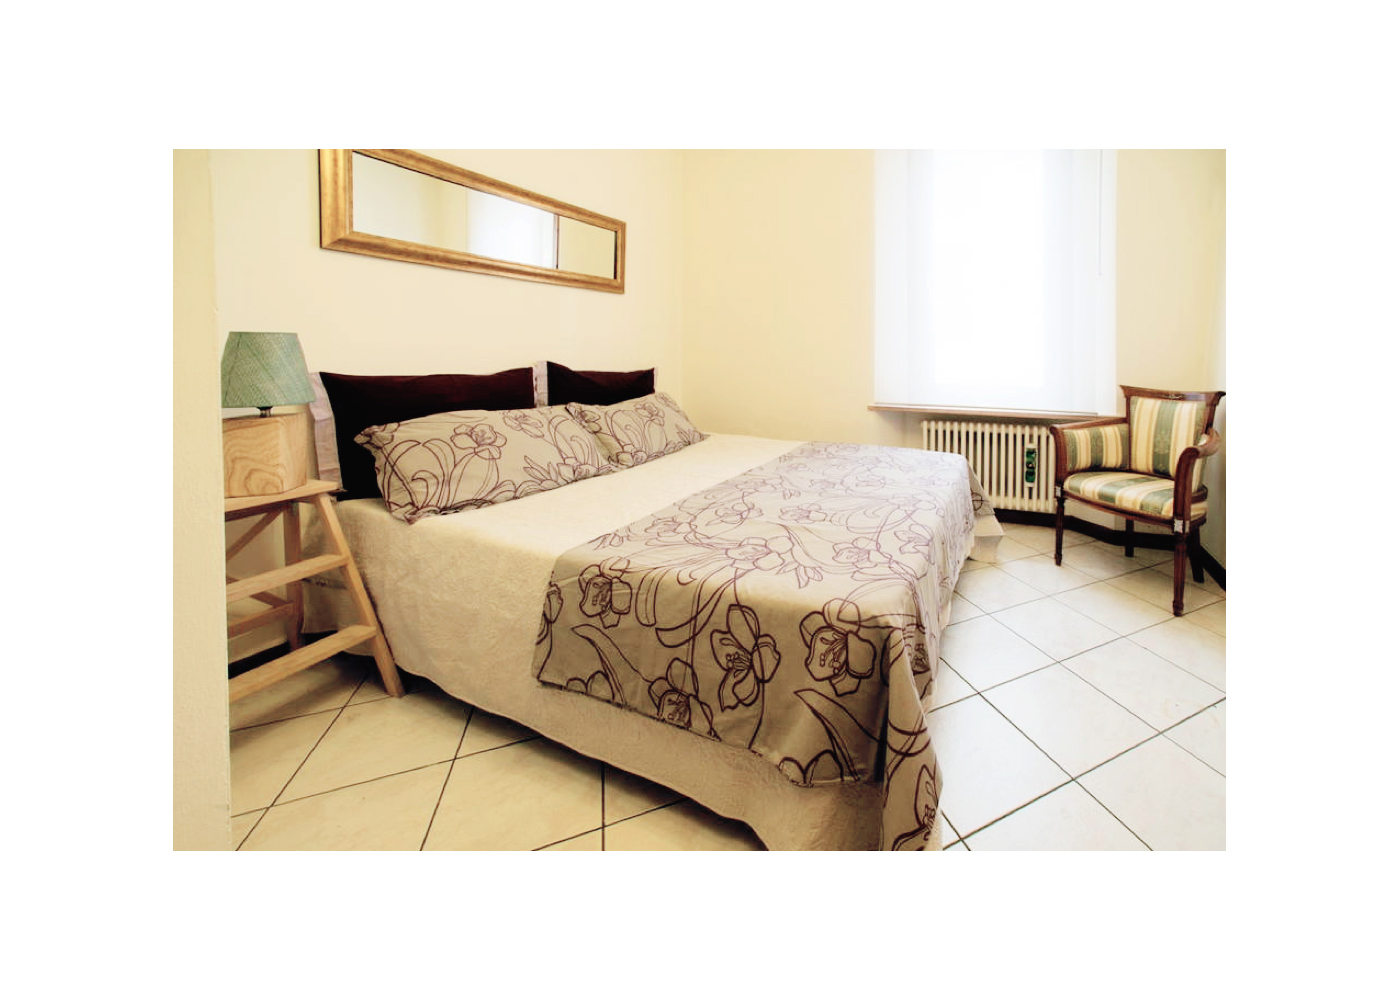 Your stay in Verona Easy Loft apartment